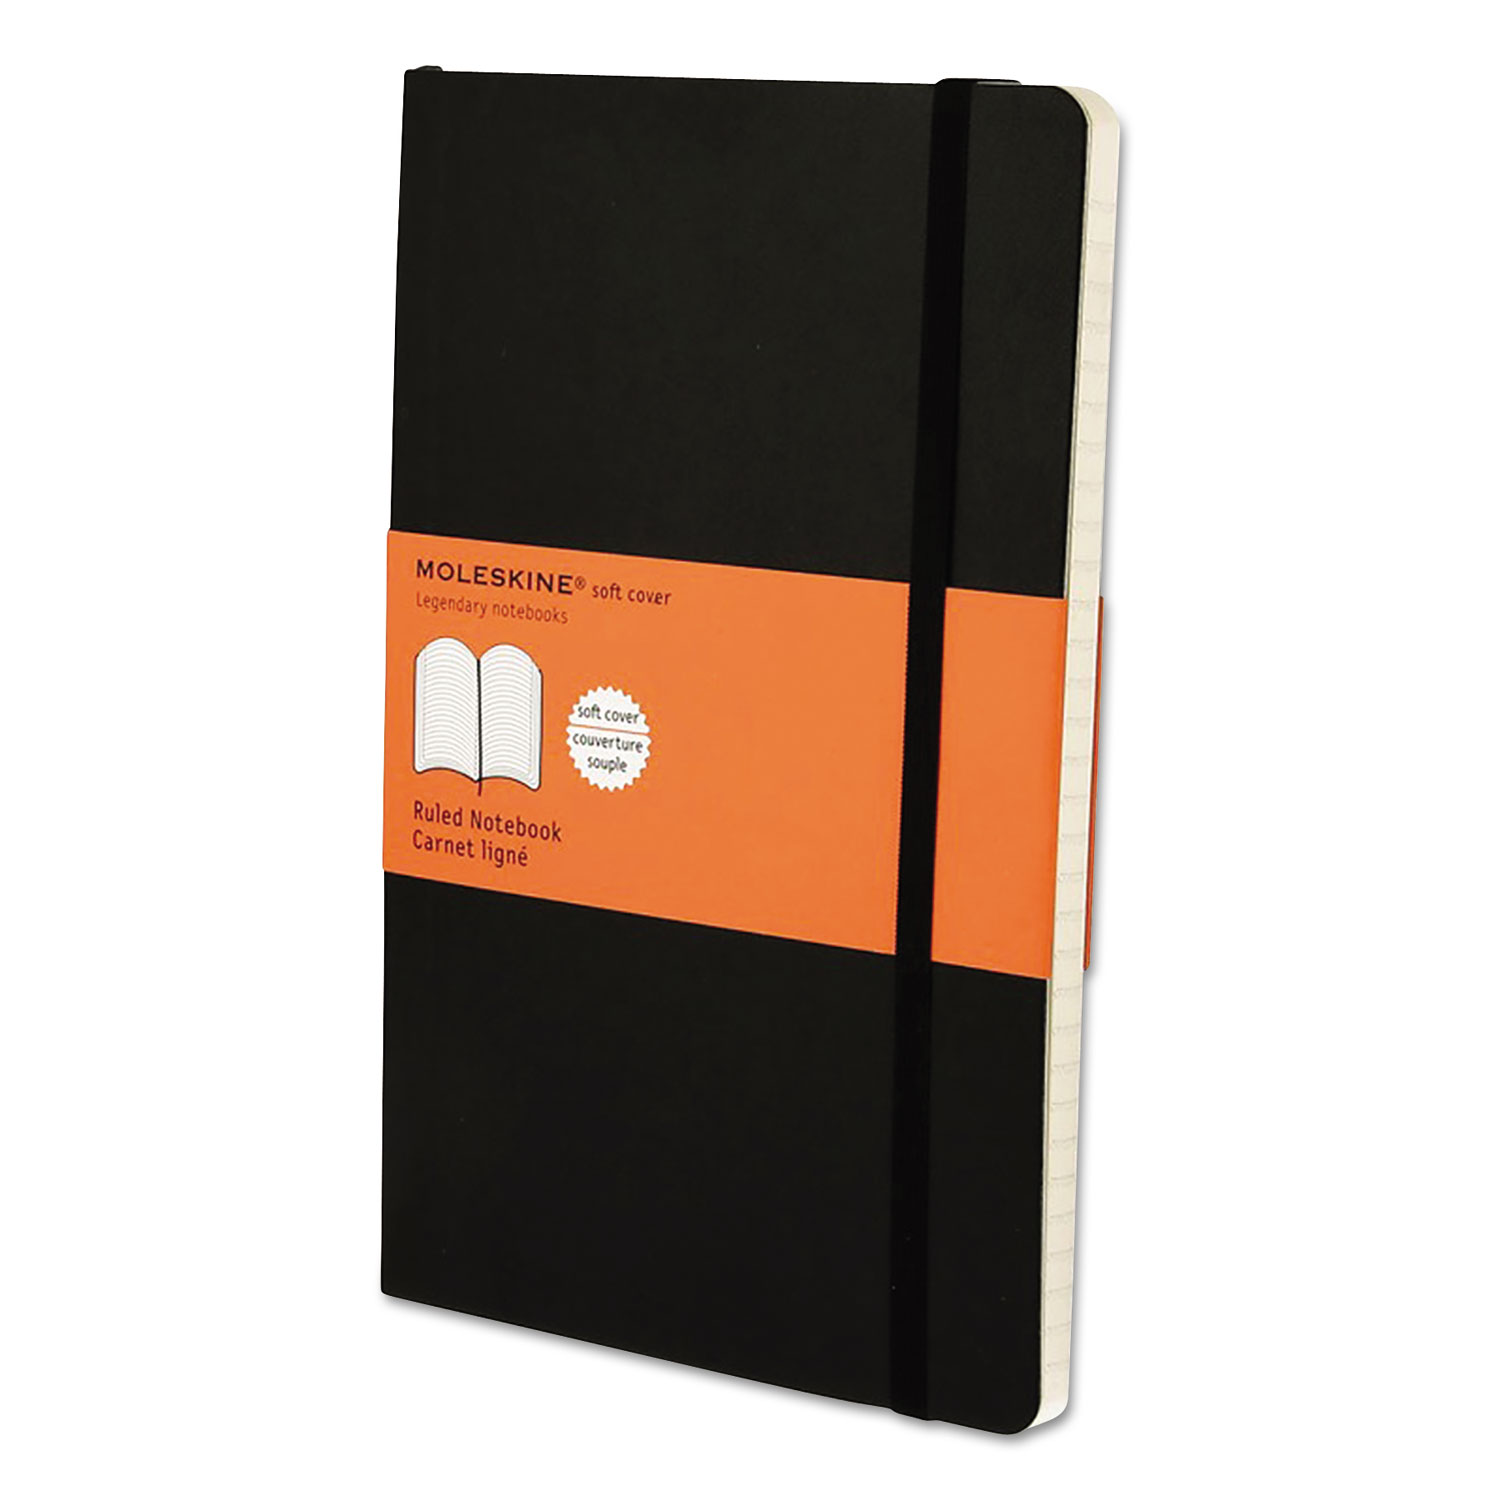  Moleskine 9788883707162 Classic Softcover Notebook, 1 Subject, Narrow Rule, Black Cover, 8.25 x 5, 192 Sheets (HBGMSL14) 